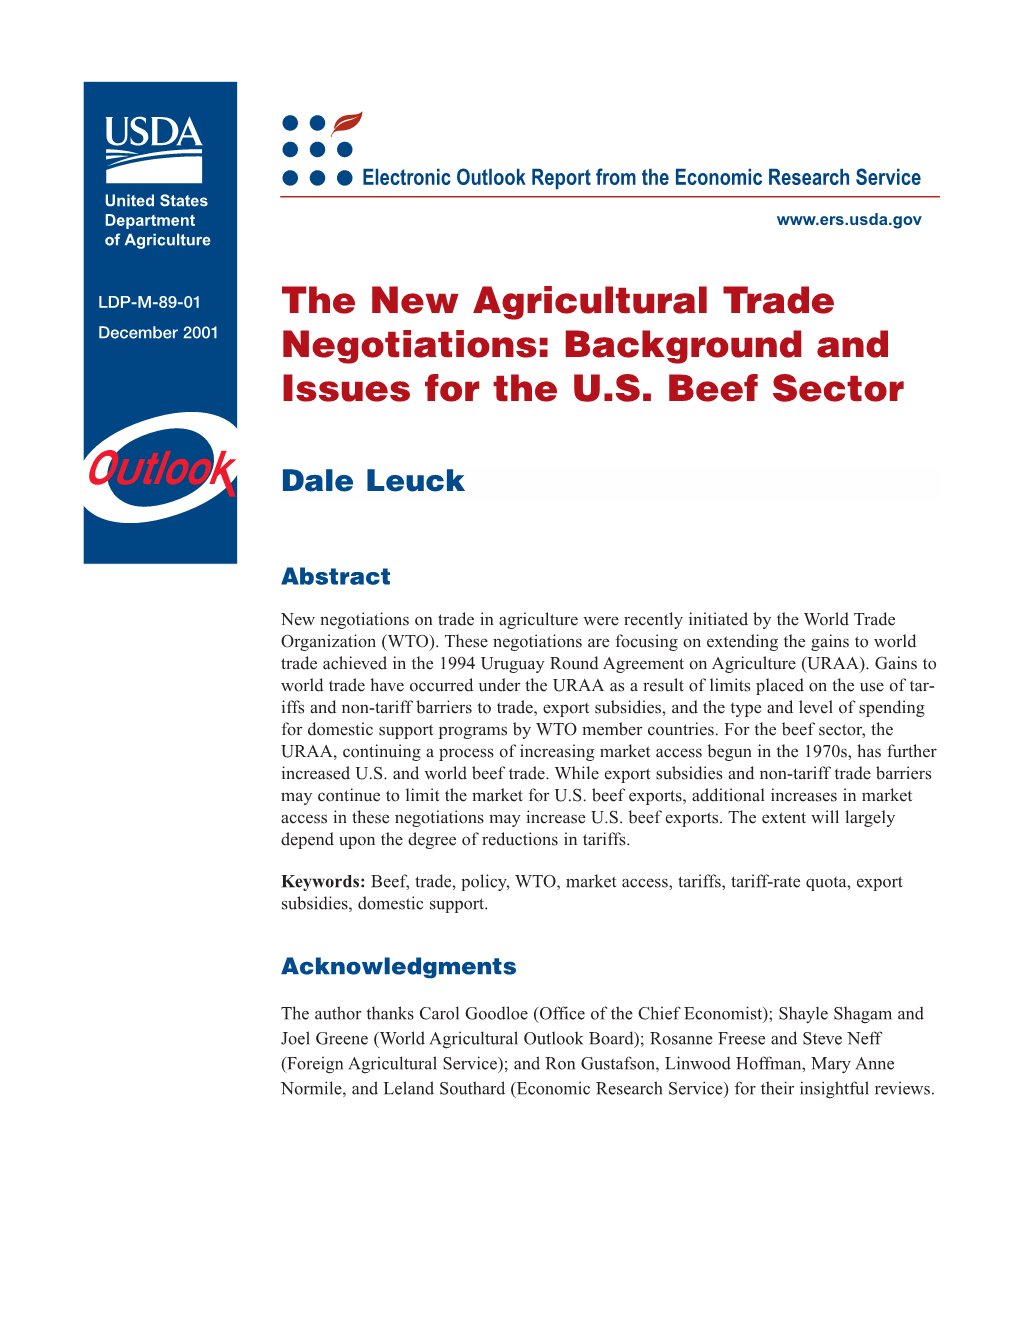 The New Agricultural Trade Negotiations: Background and Issues for the U.S